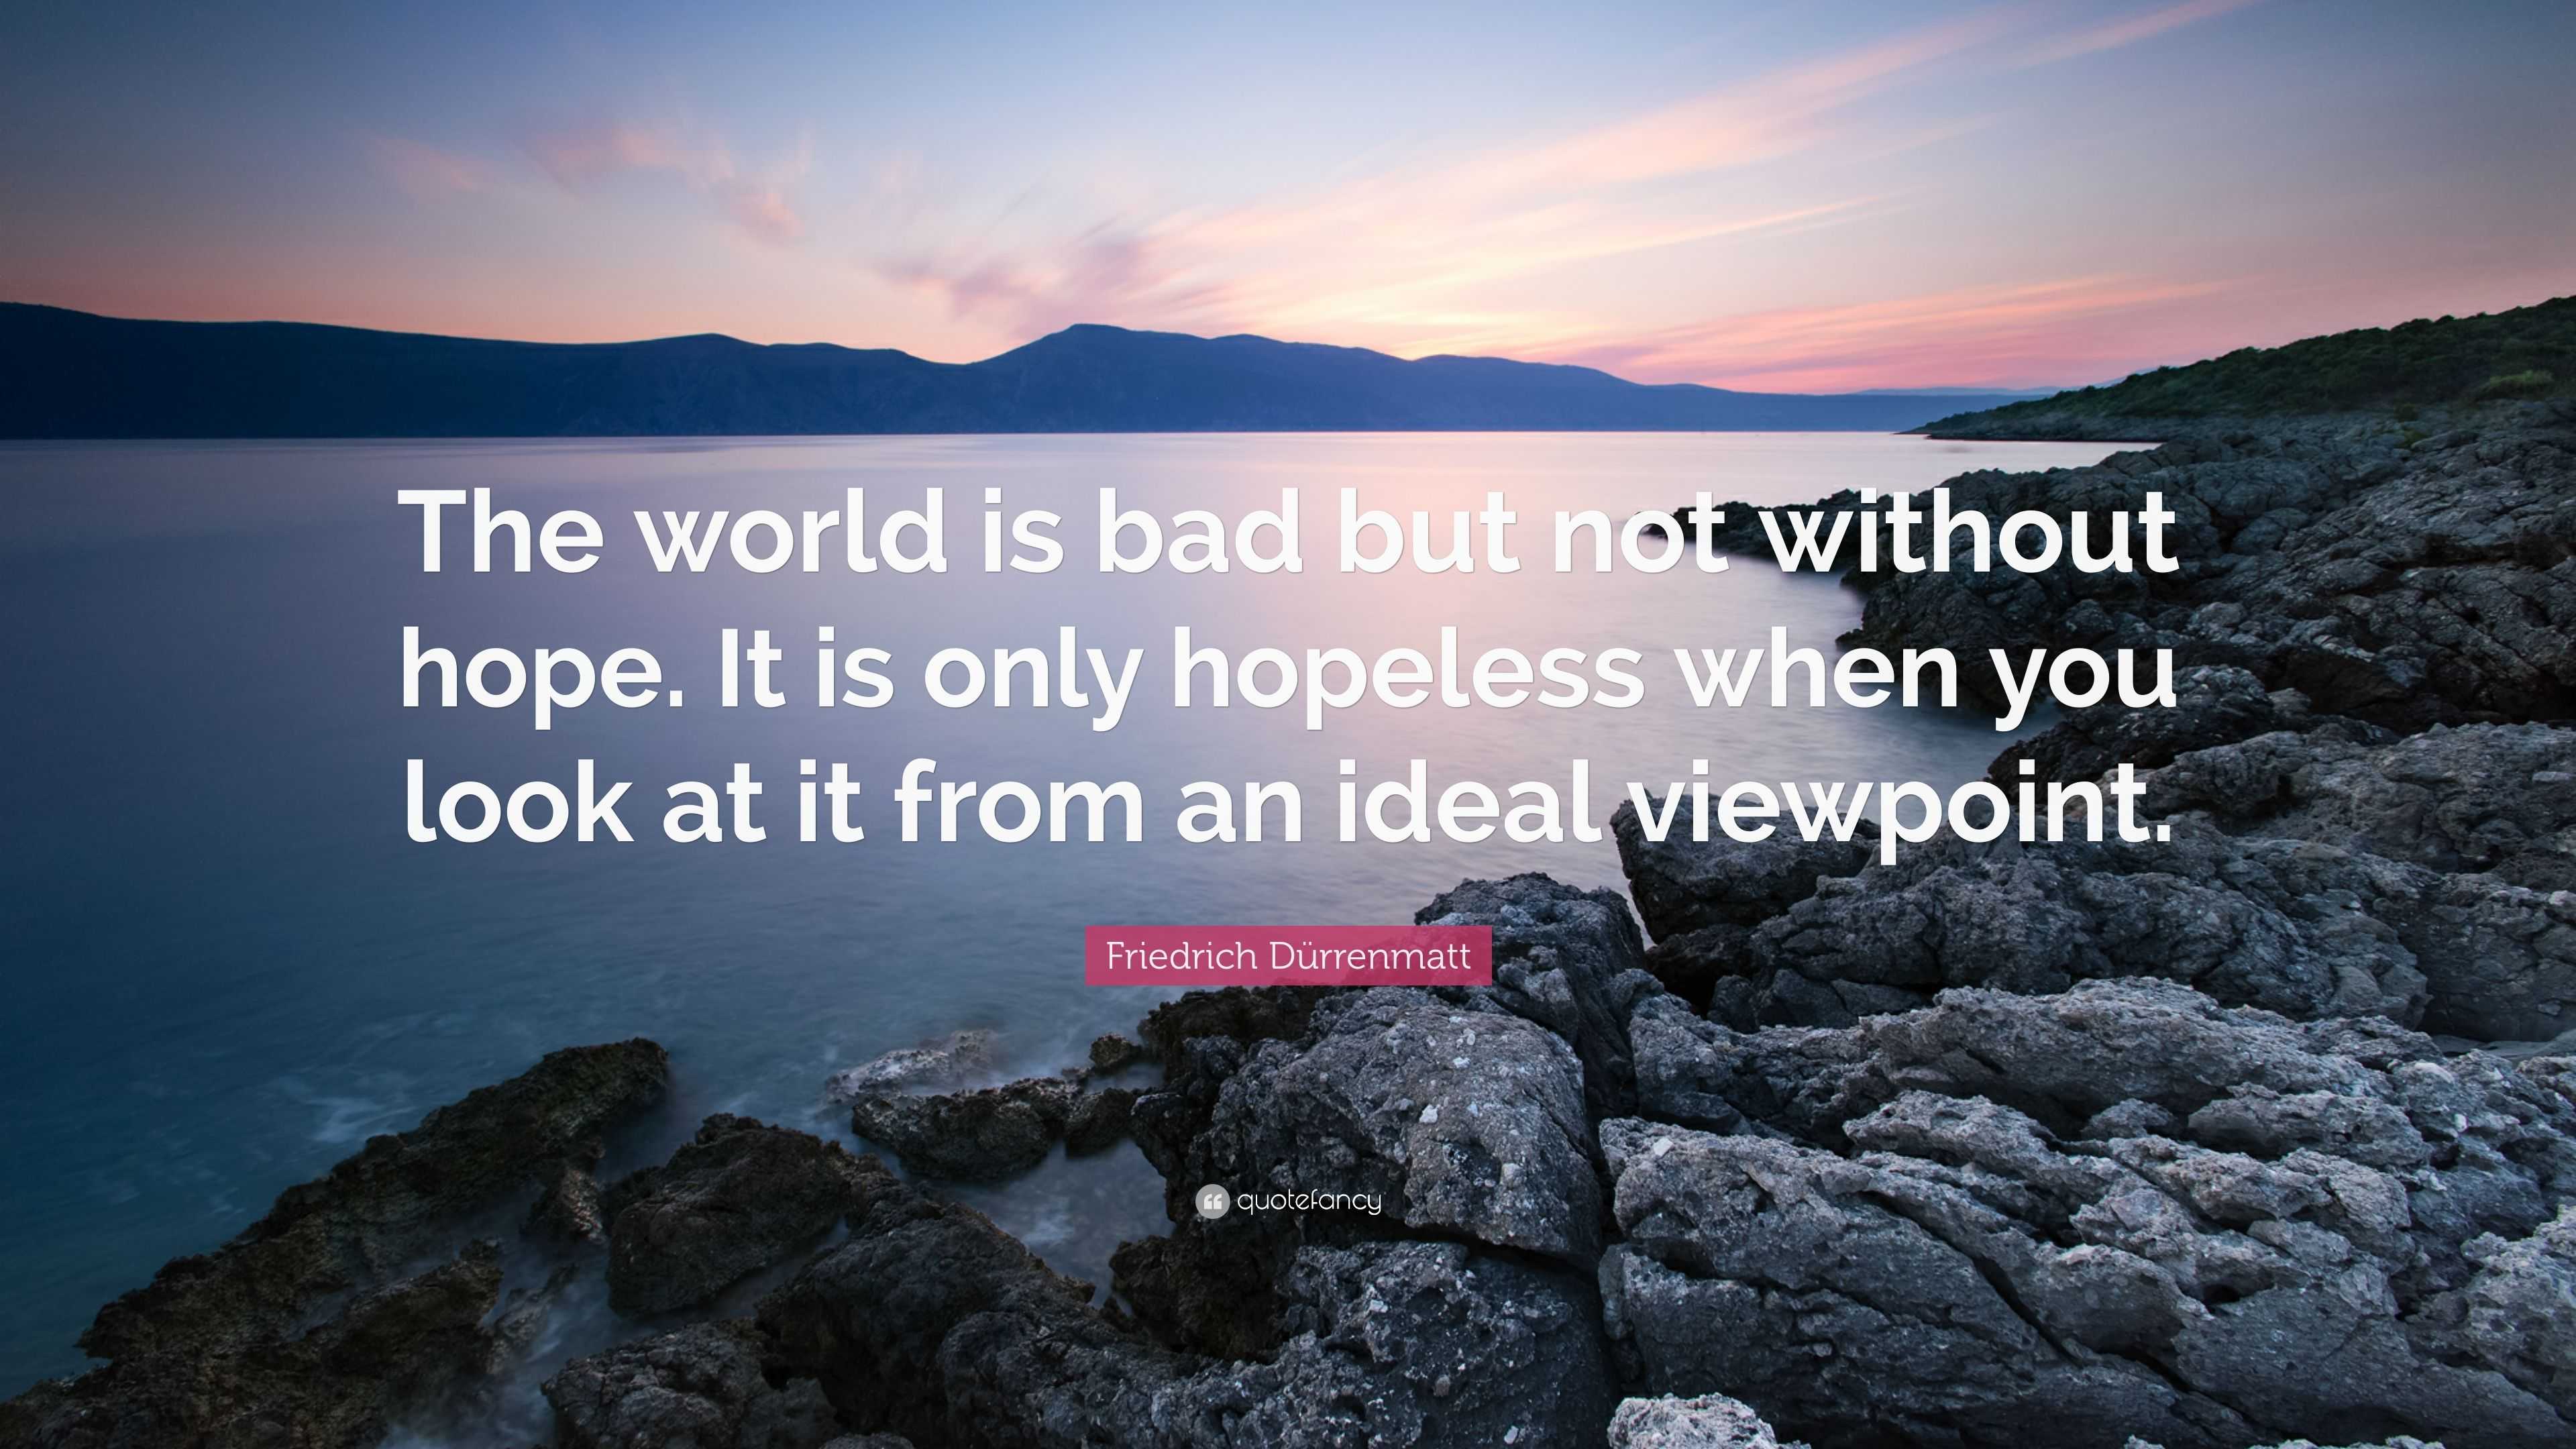 Friedrich Dürrenmatt Quote: “The world is bad but not without hope. It ...